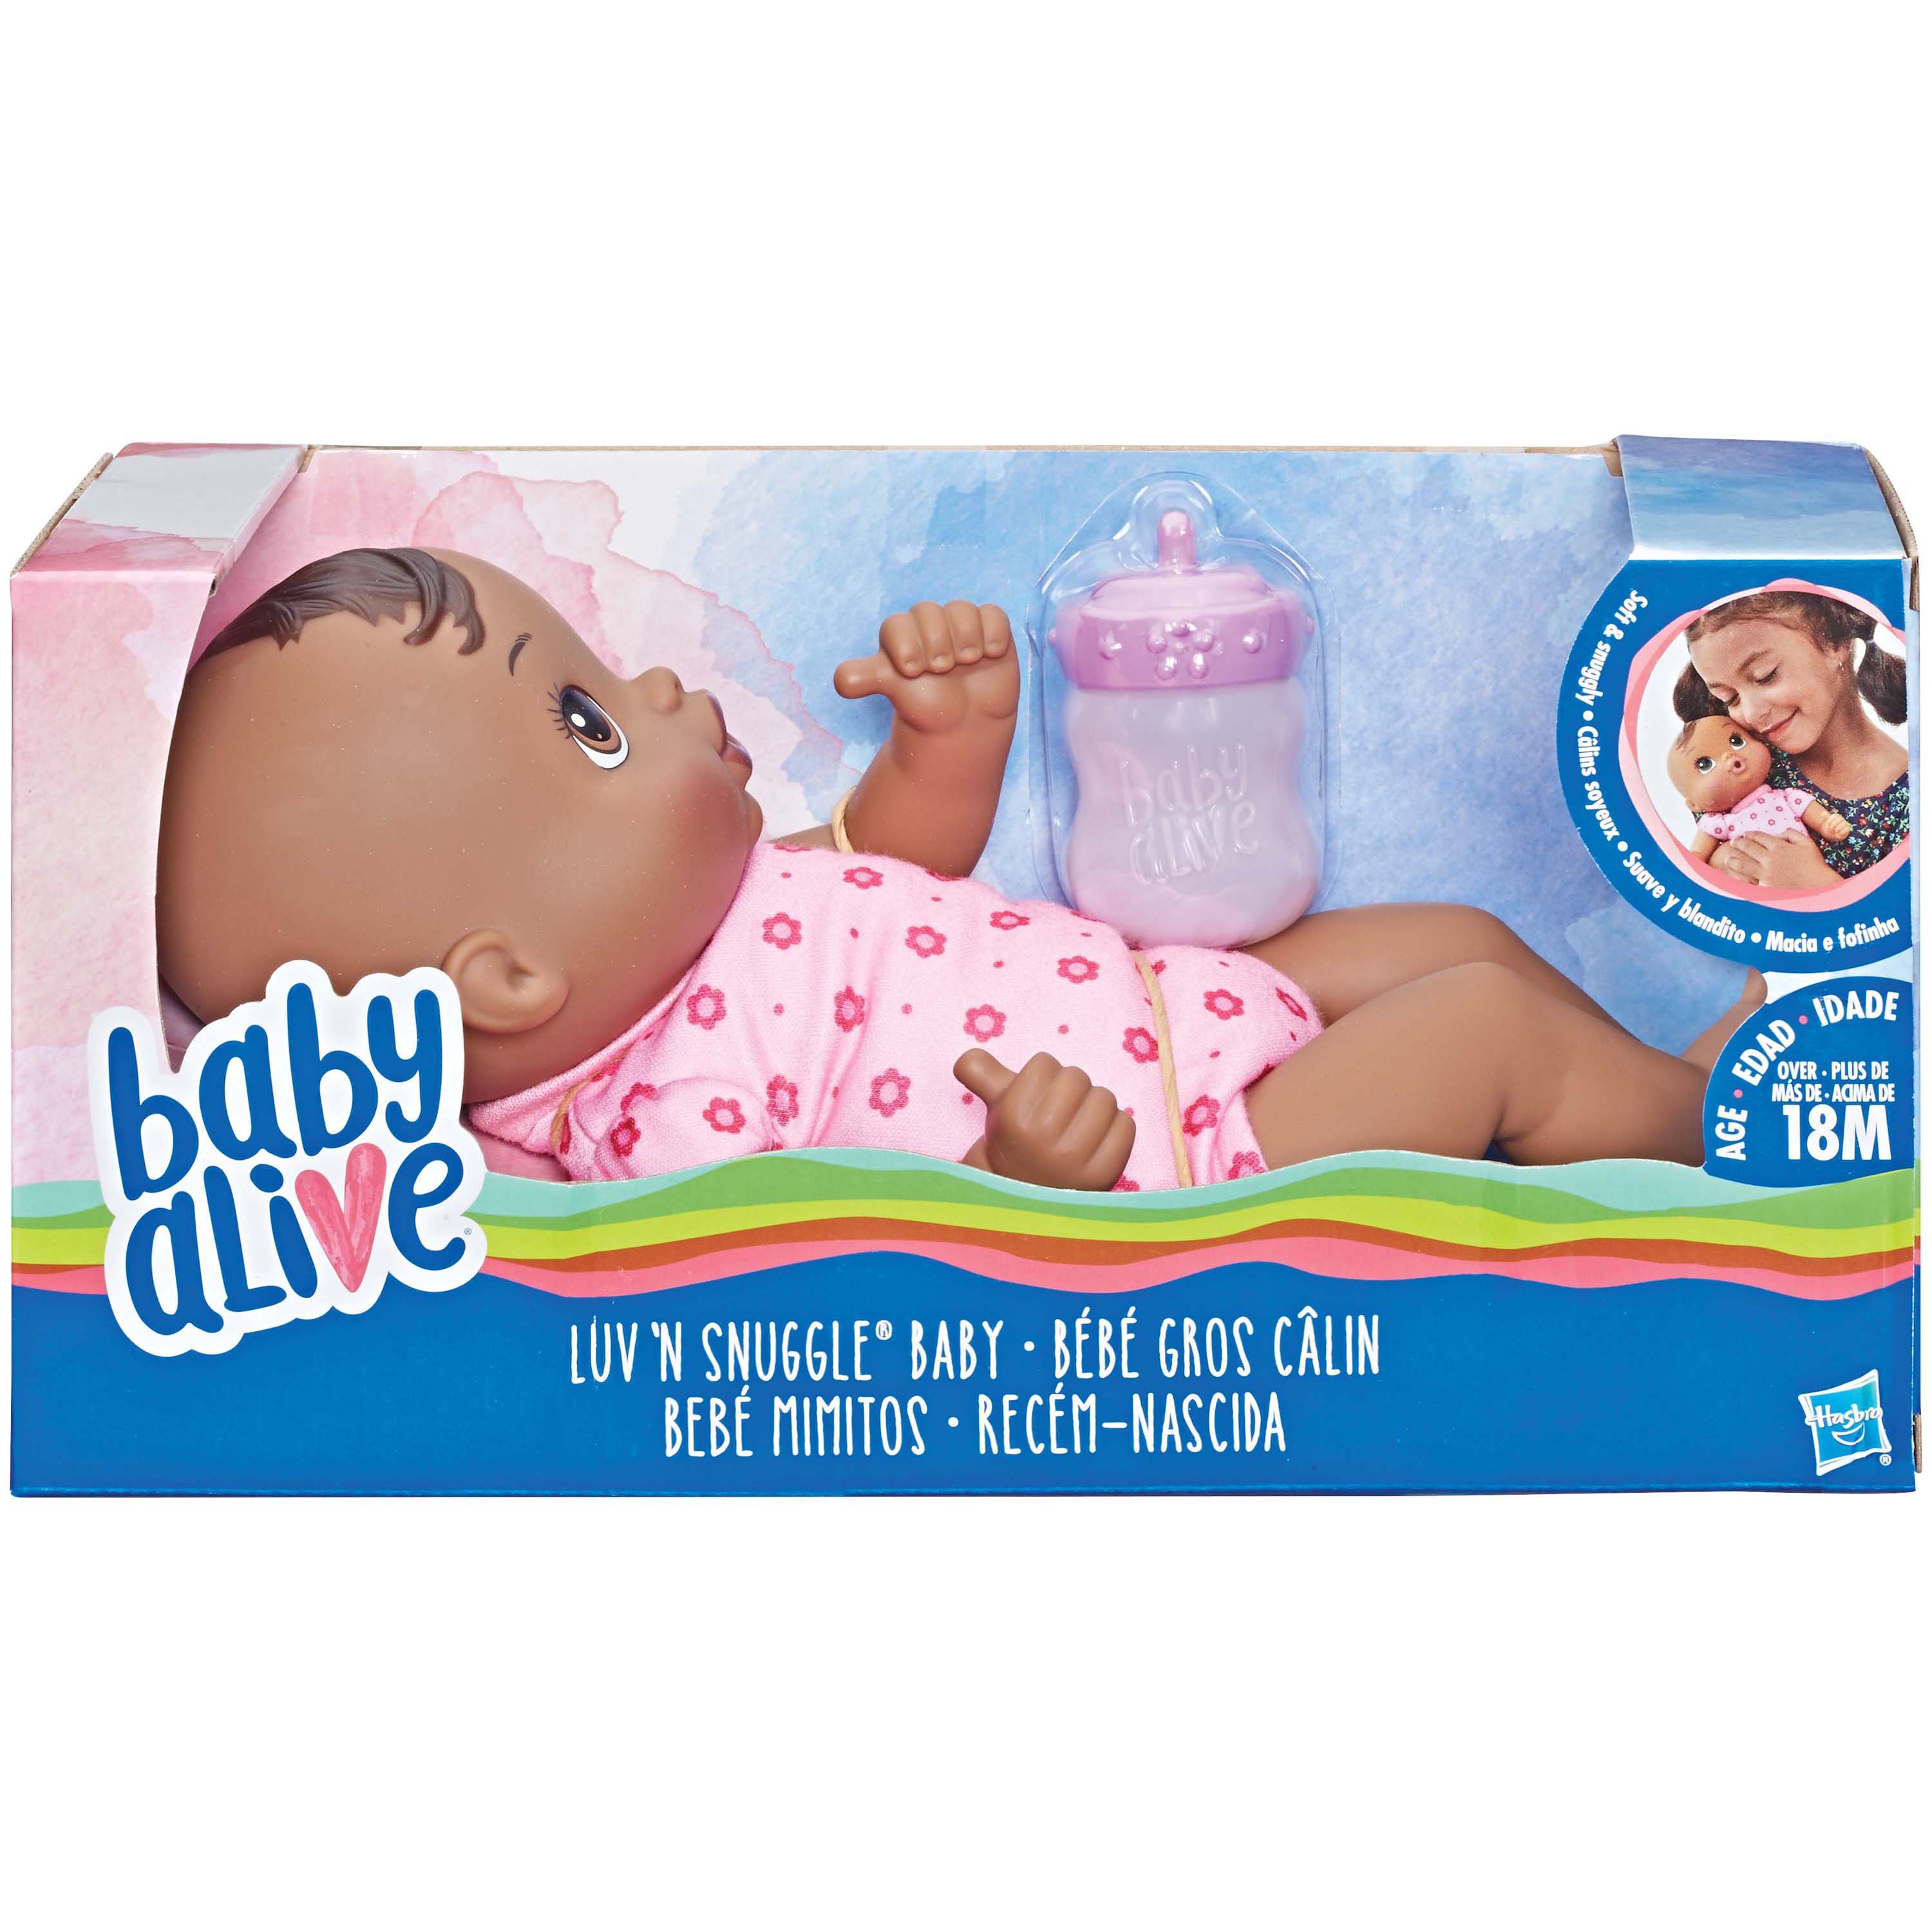 baby alive luv n snuggle baby doll